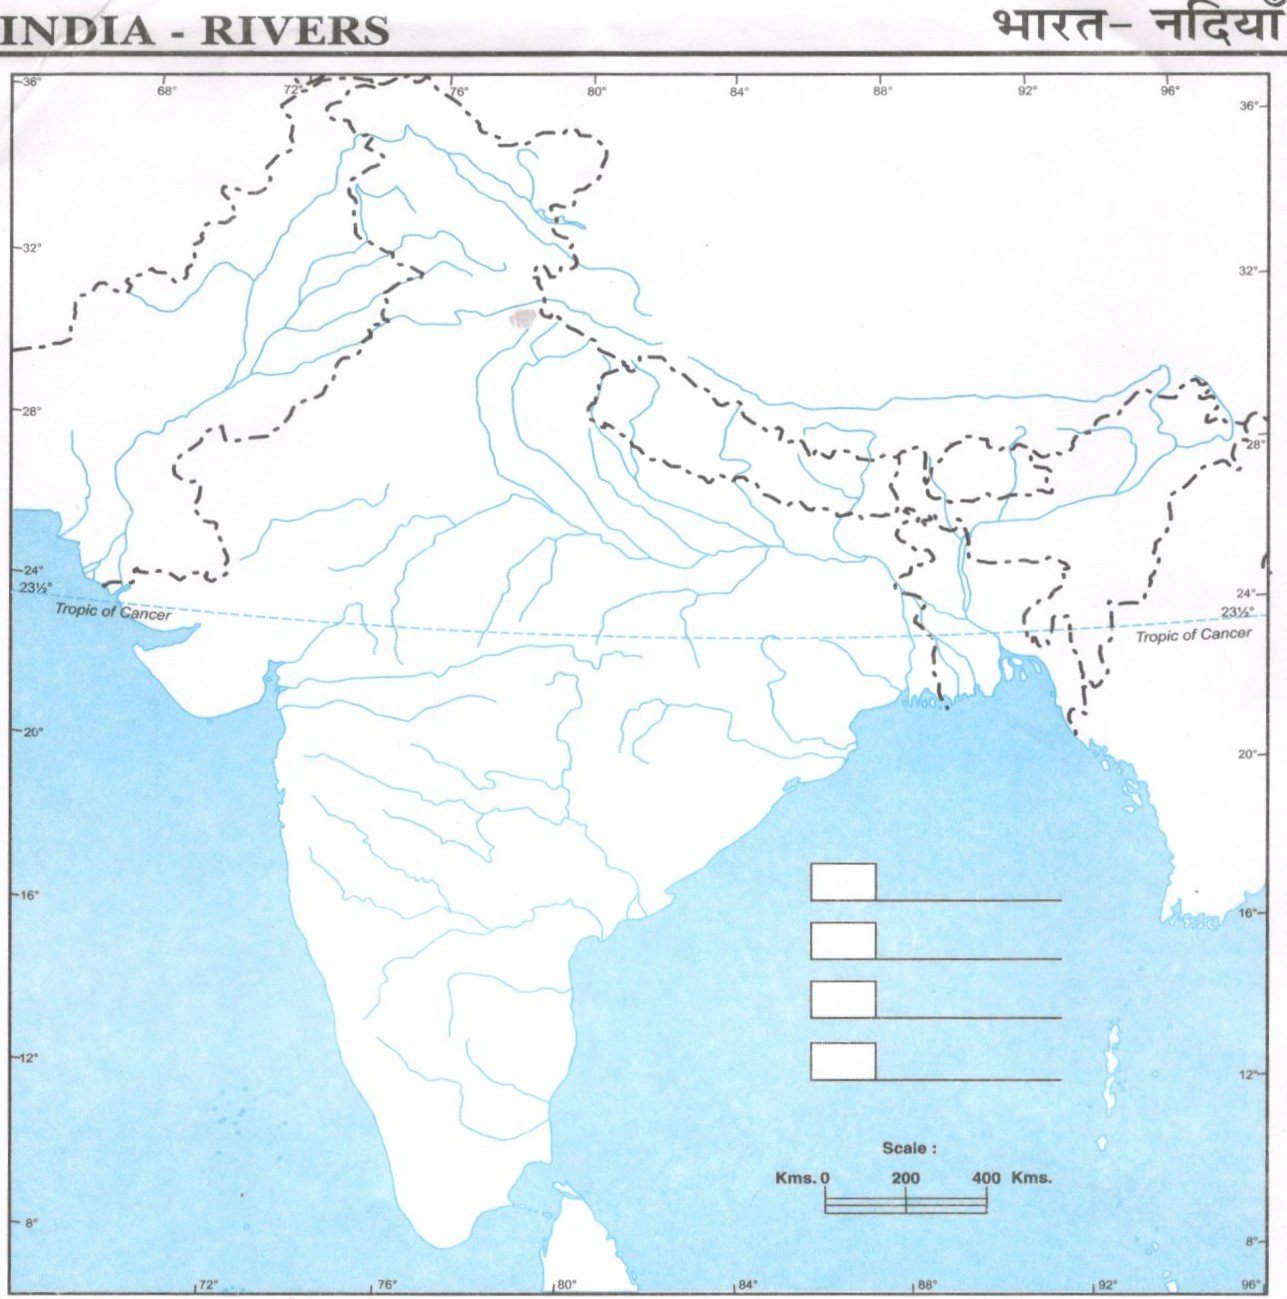 Indian River Map Hd Indian River Map - Pdf Download Physical Map Of India With Rivers